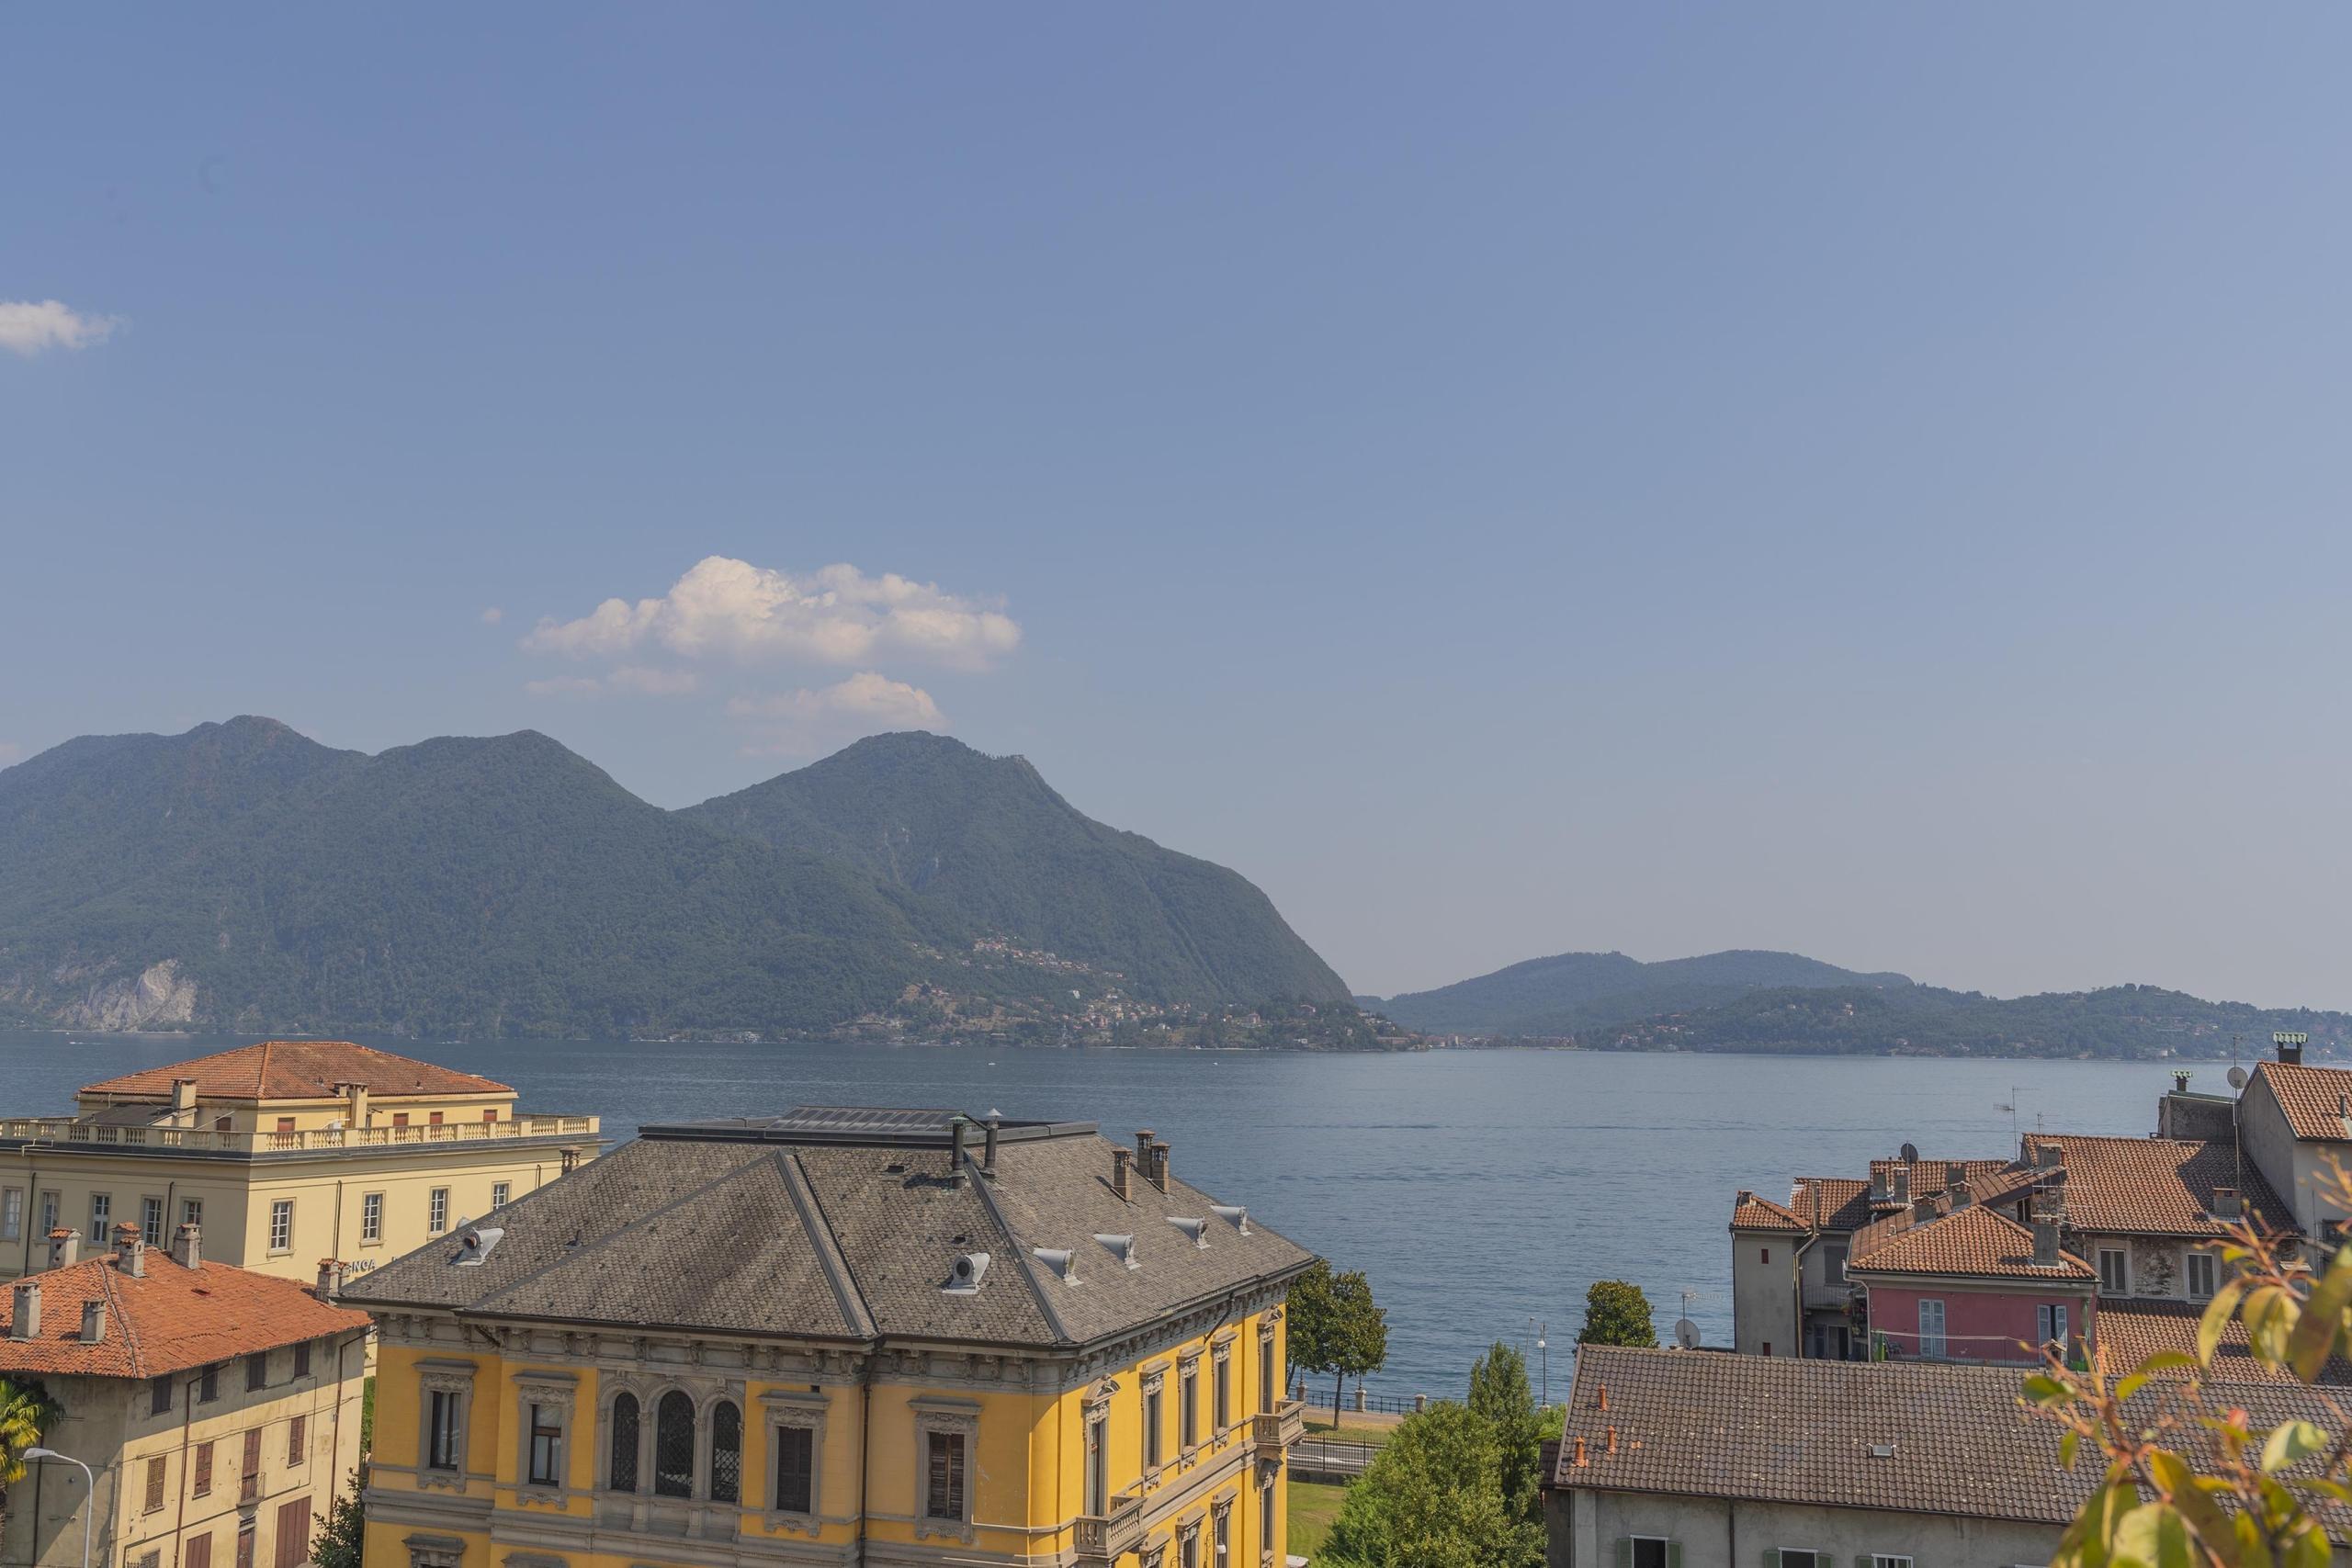 luxury-penthouse-apartment-renovated-lake-front-lake-view-terrace-centre-of-intra-verbania-lake-maggiore